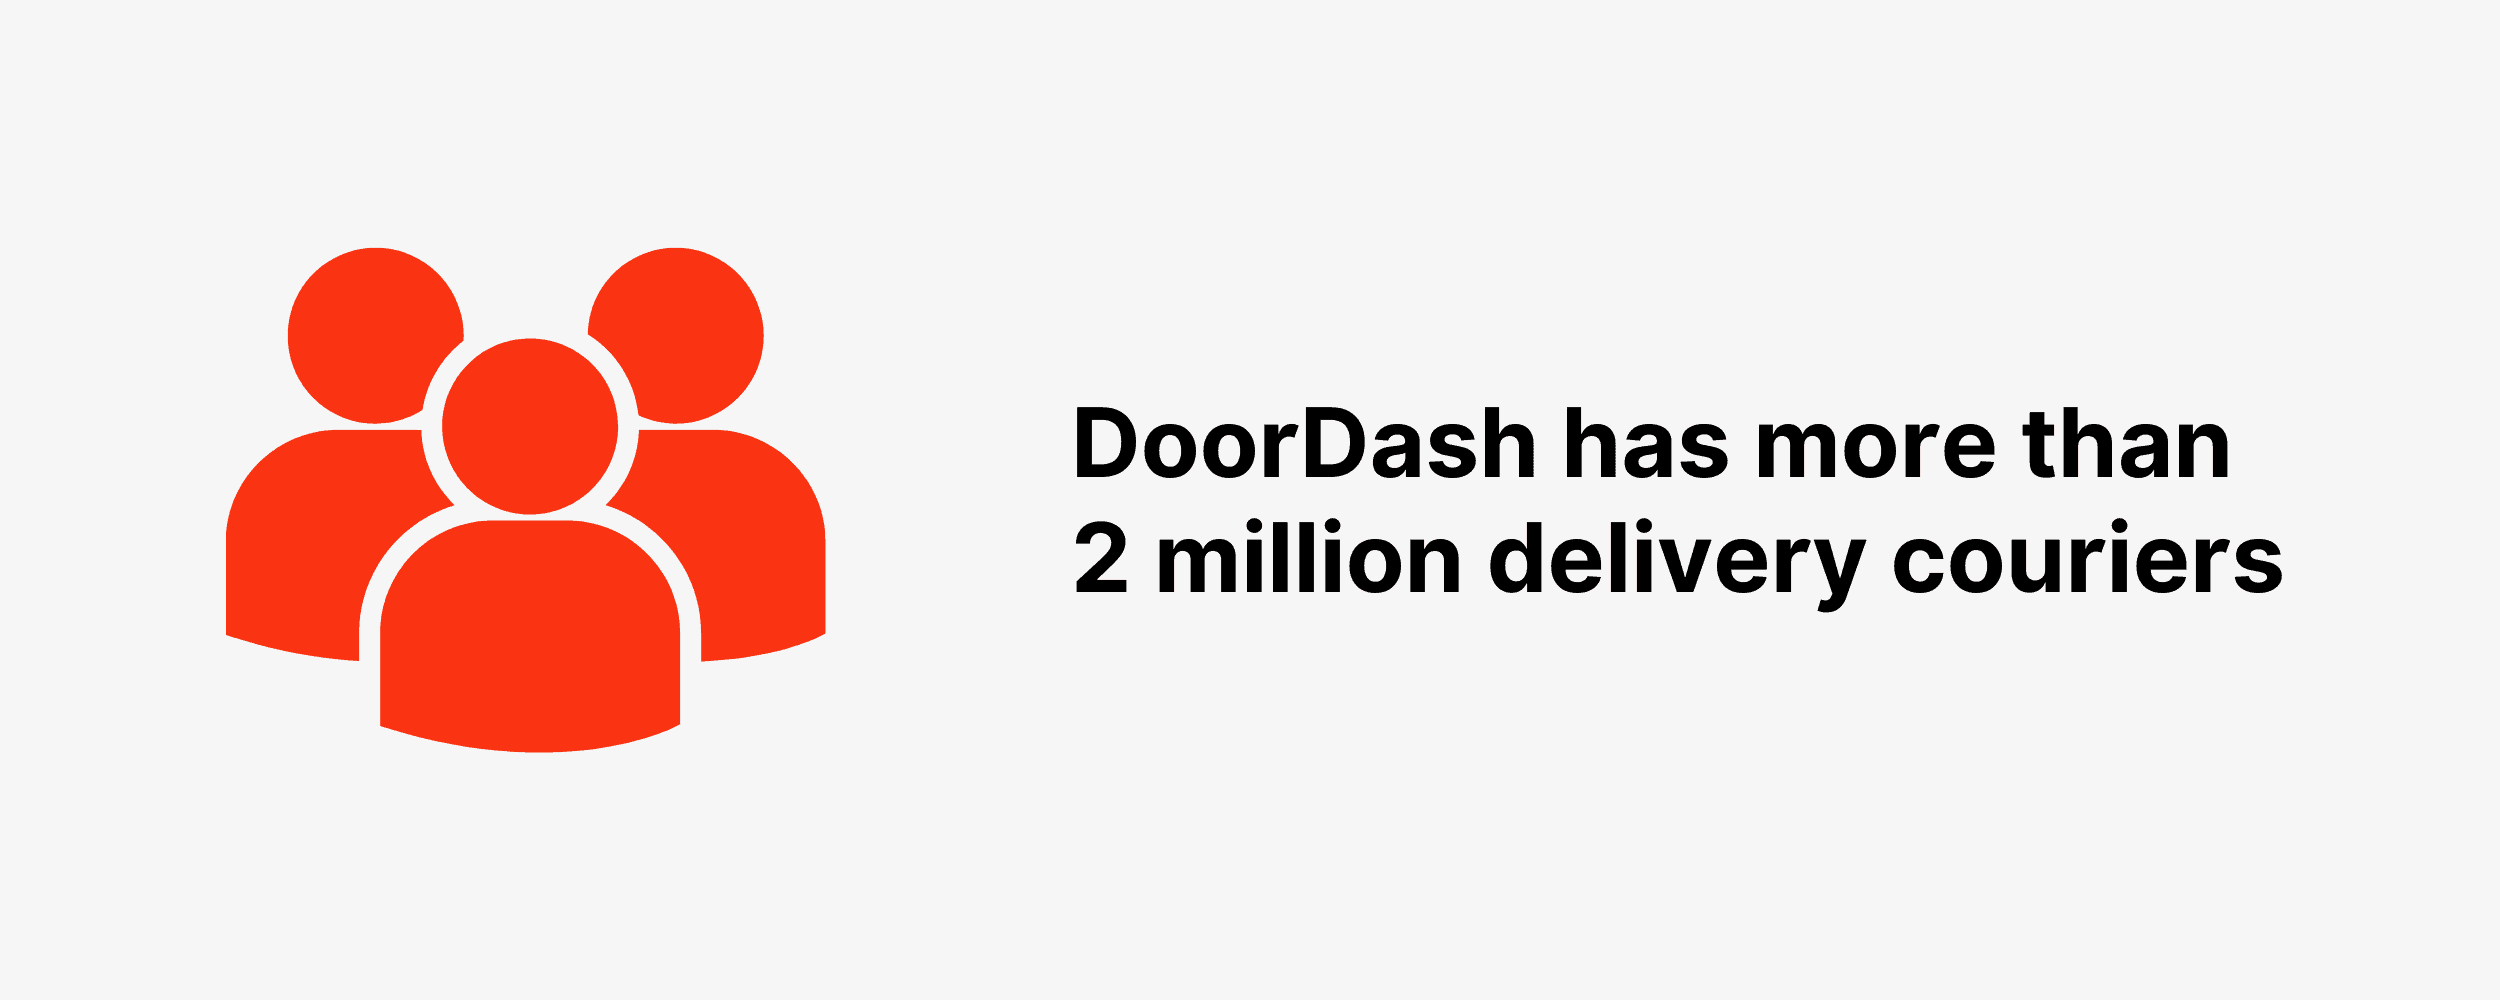 DoorDash has more than 2 million delivery couriers